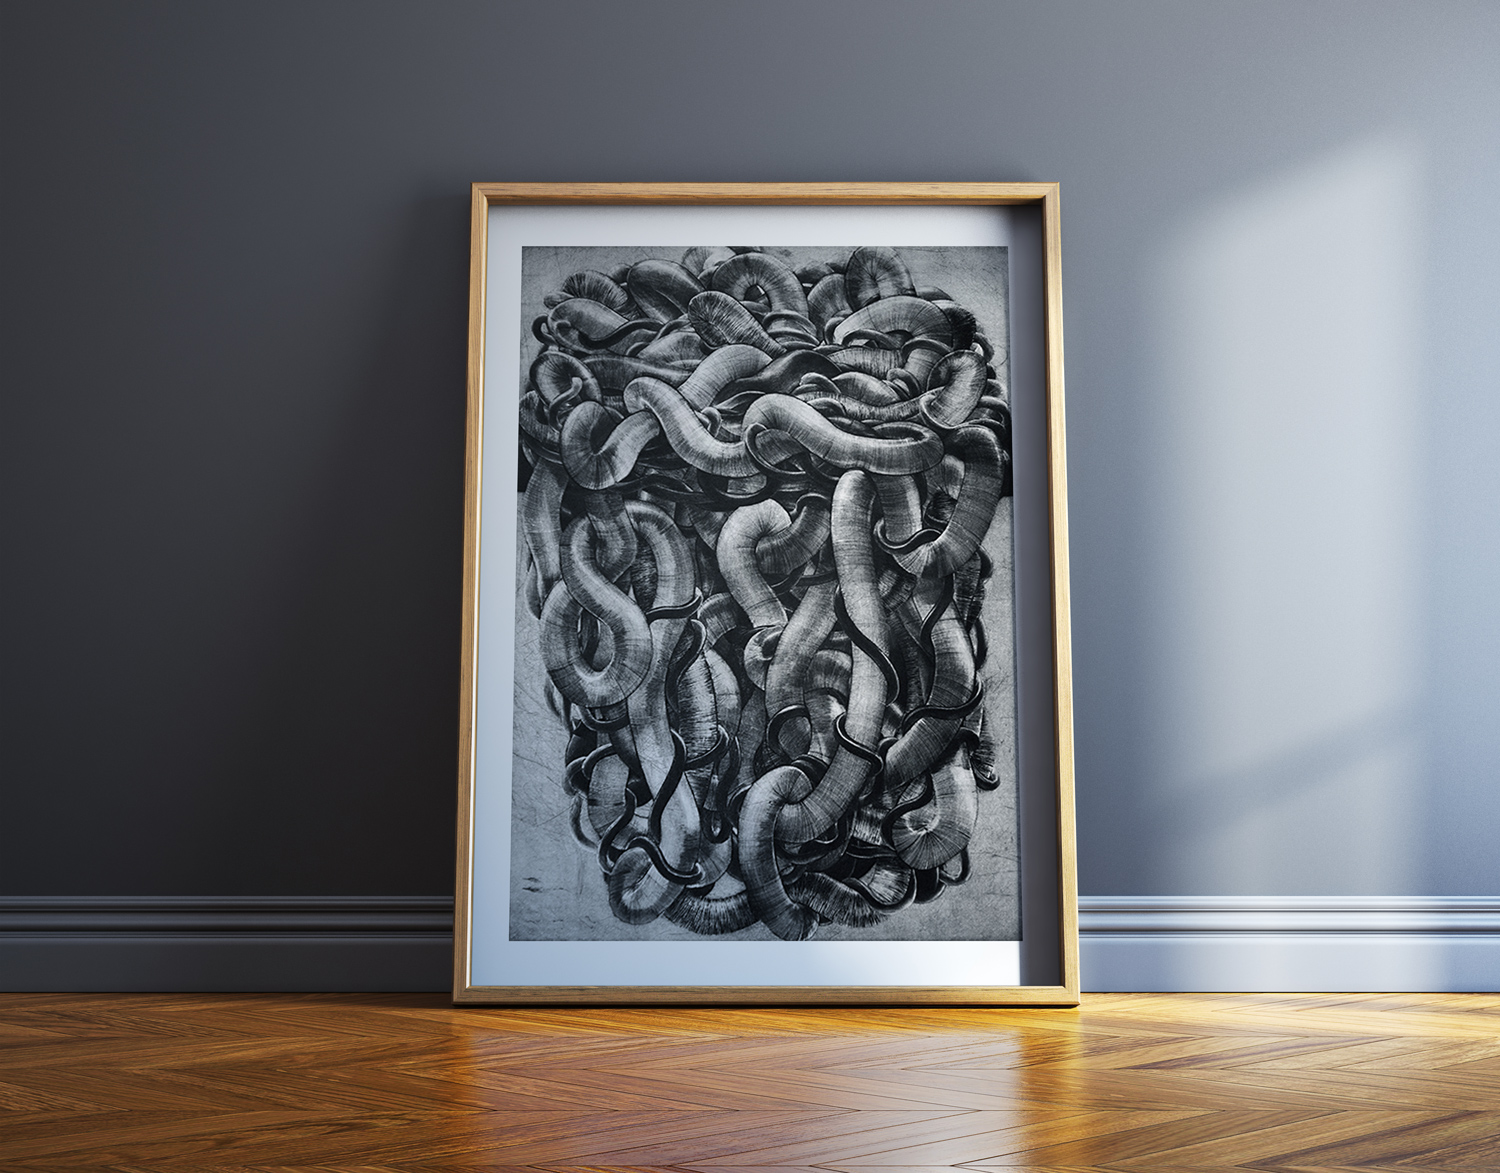 art-prints, engravings, abstract, aesthetic, monochrome, movement, black, grey, white, ink, paper, abstract-forms, autumn, danish, decorative, design, interior, interior-design, nordic, scandinavien, Buy original high quality art. Paintings, drawings, limited edition prints & posters by talented artists.